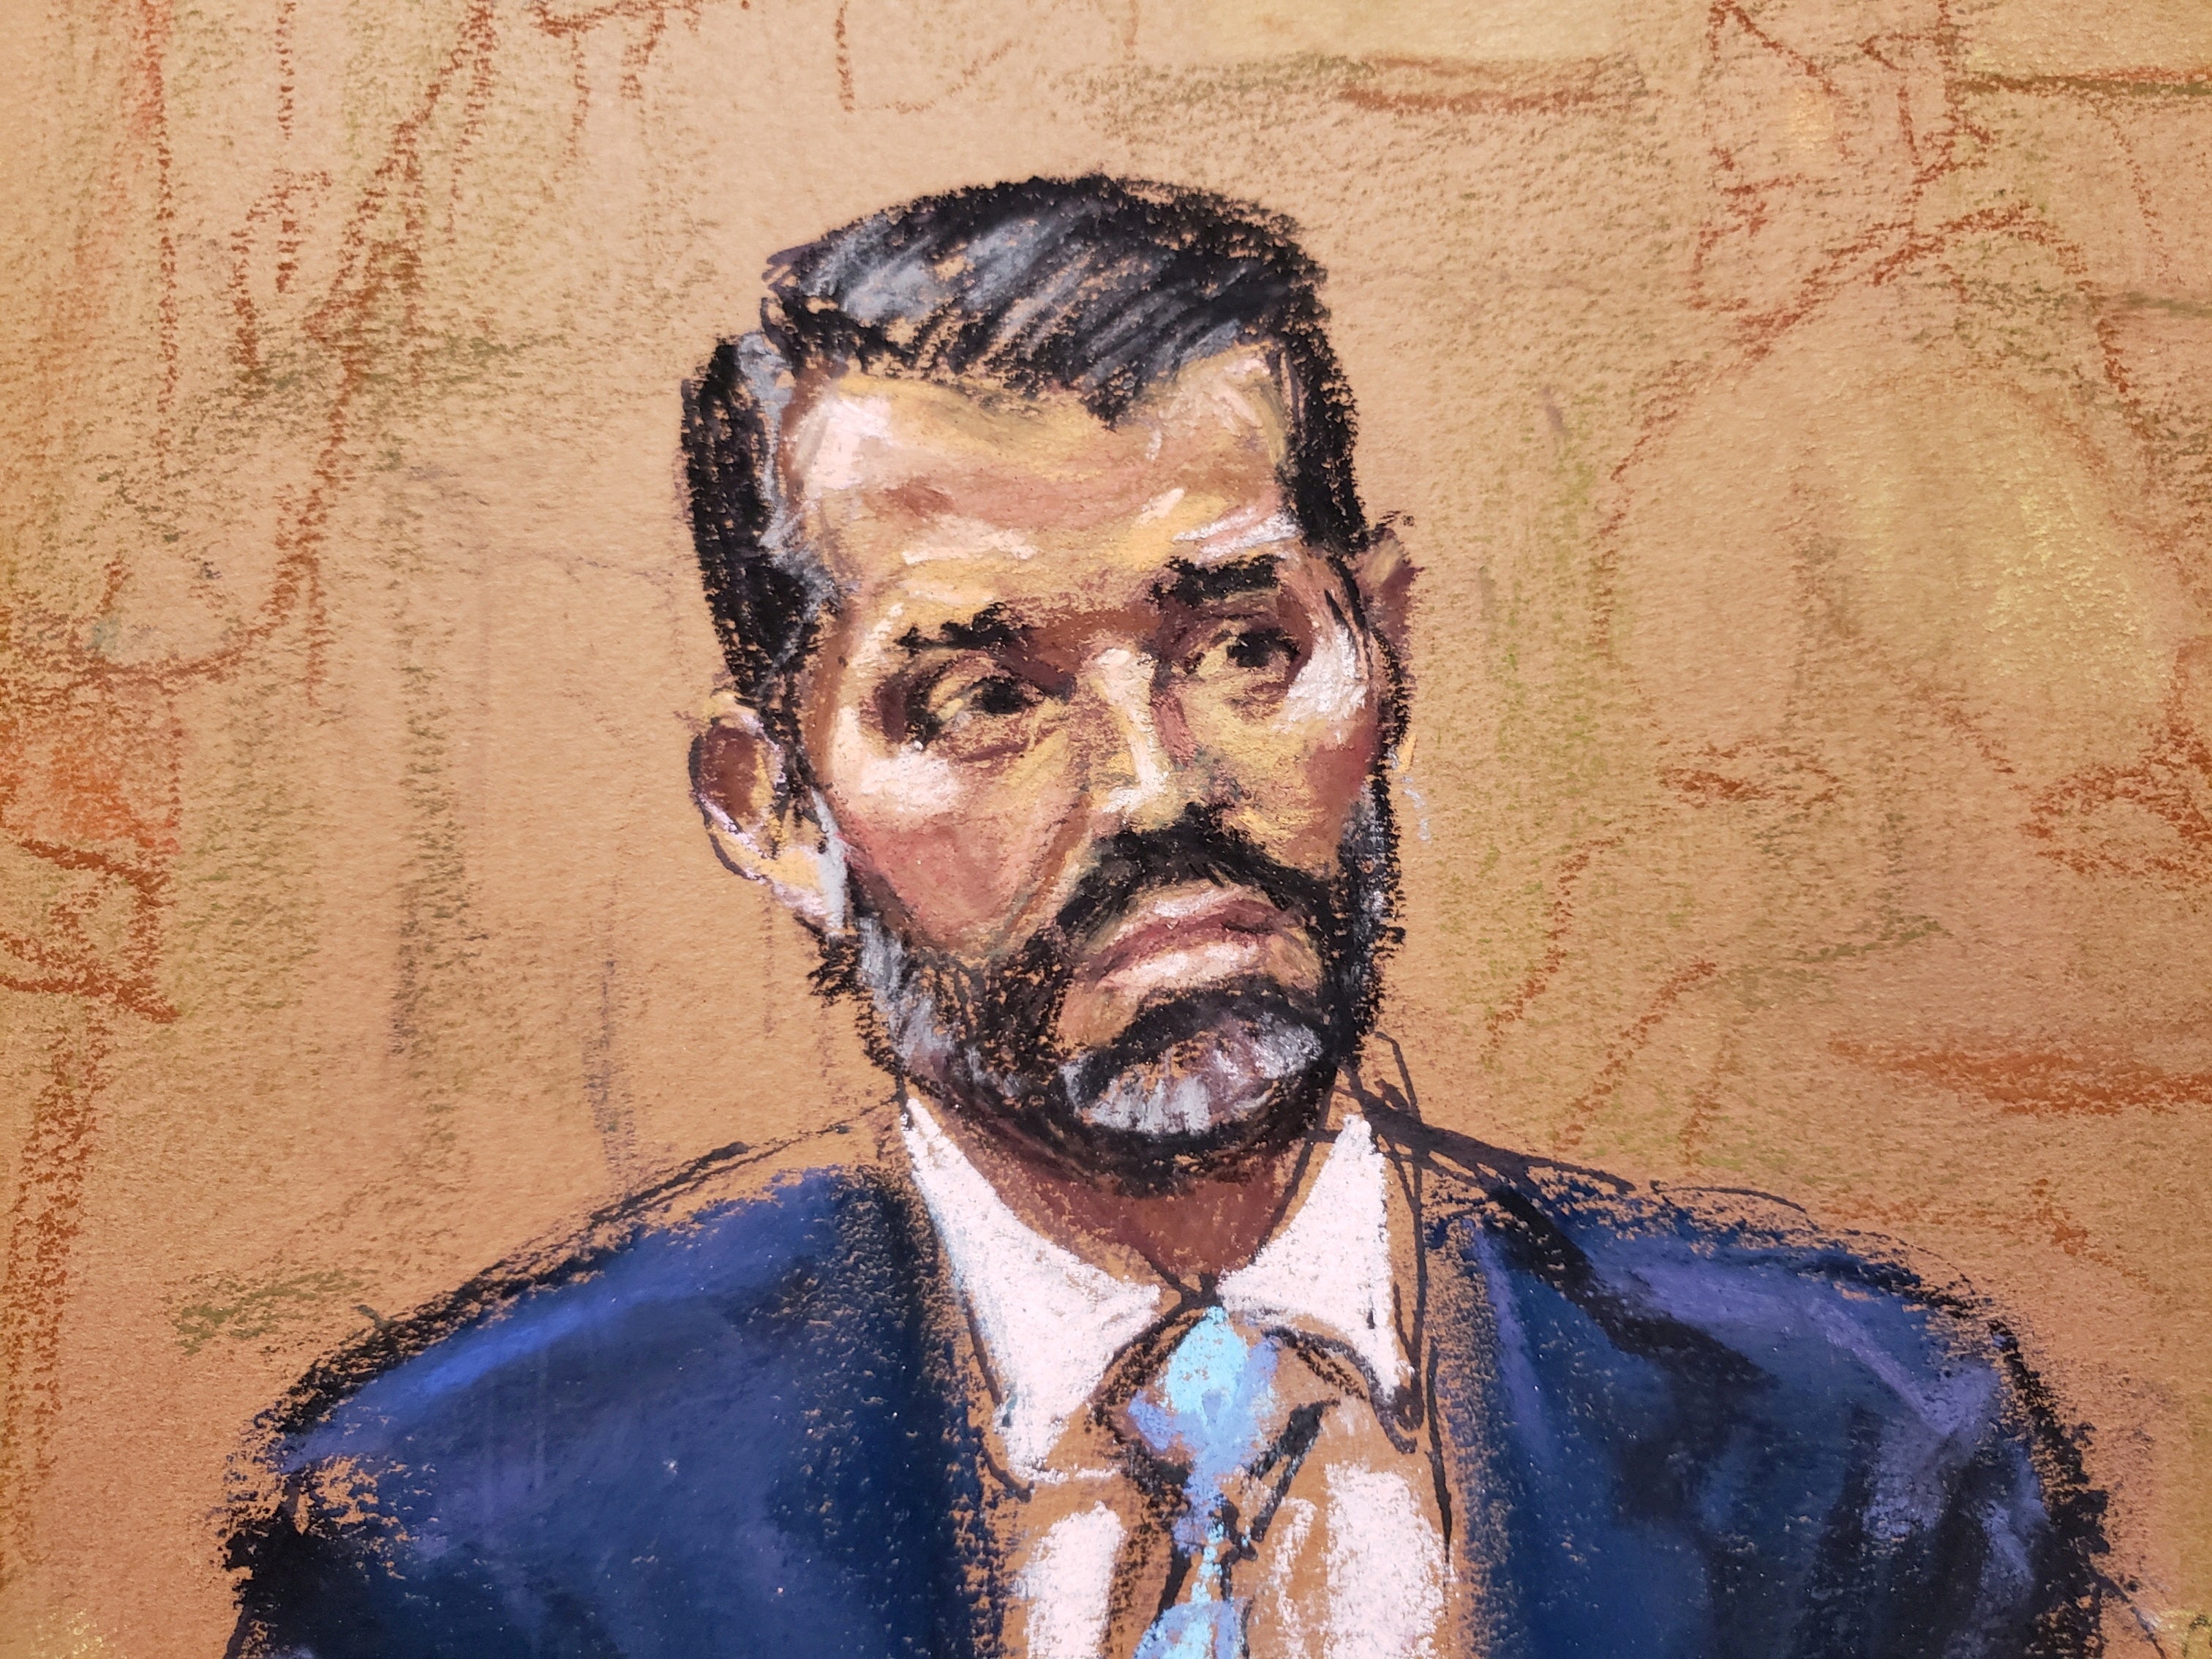 One of Jane Rosenberg’s court sketches of Donald Trump Jr